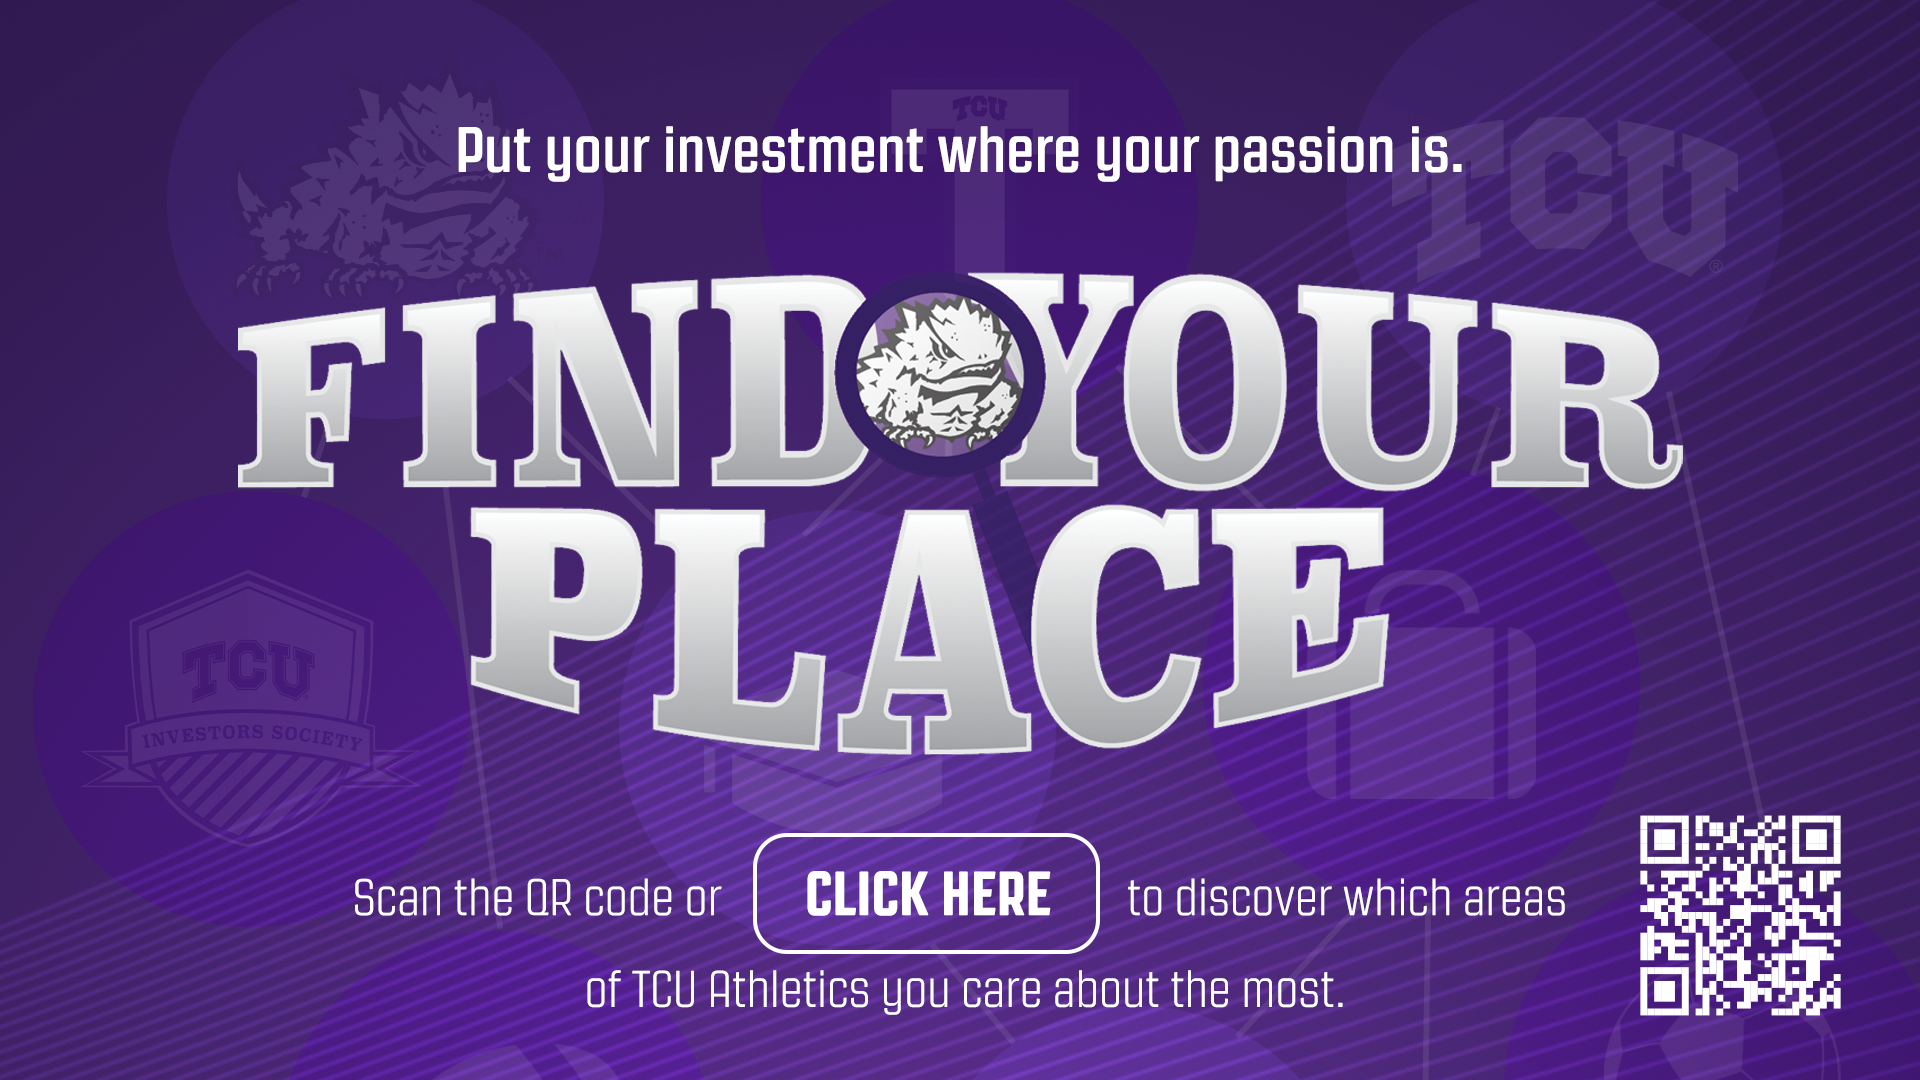 Find Your Place - Scan the QR Code or CLICK HERE to discover which areas of TCU Athletics you care about the most.